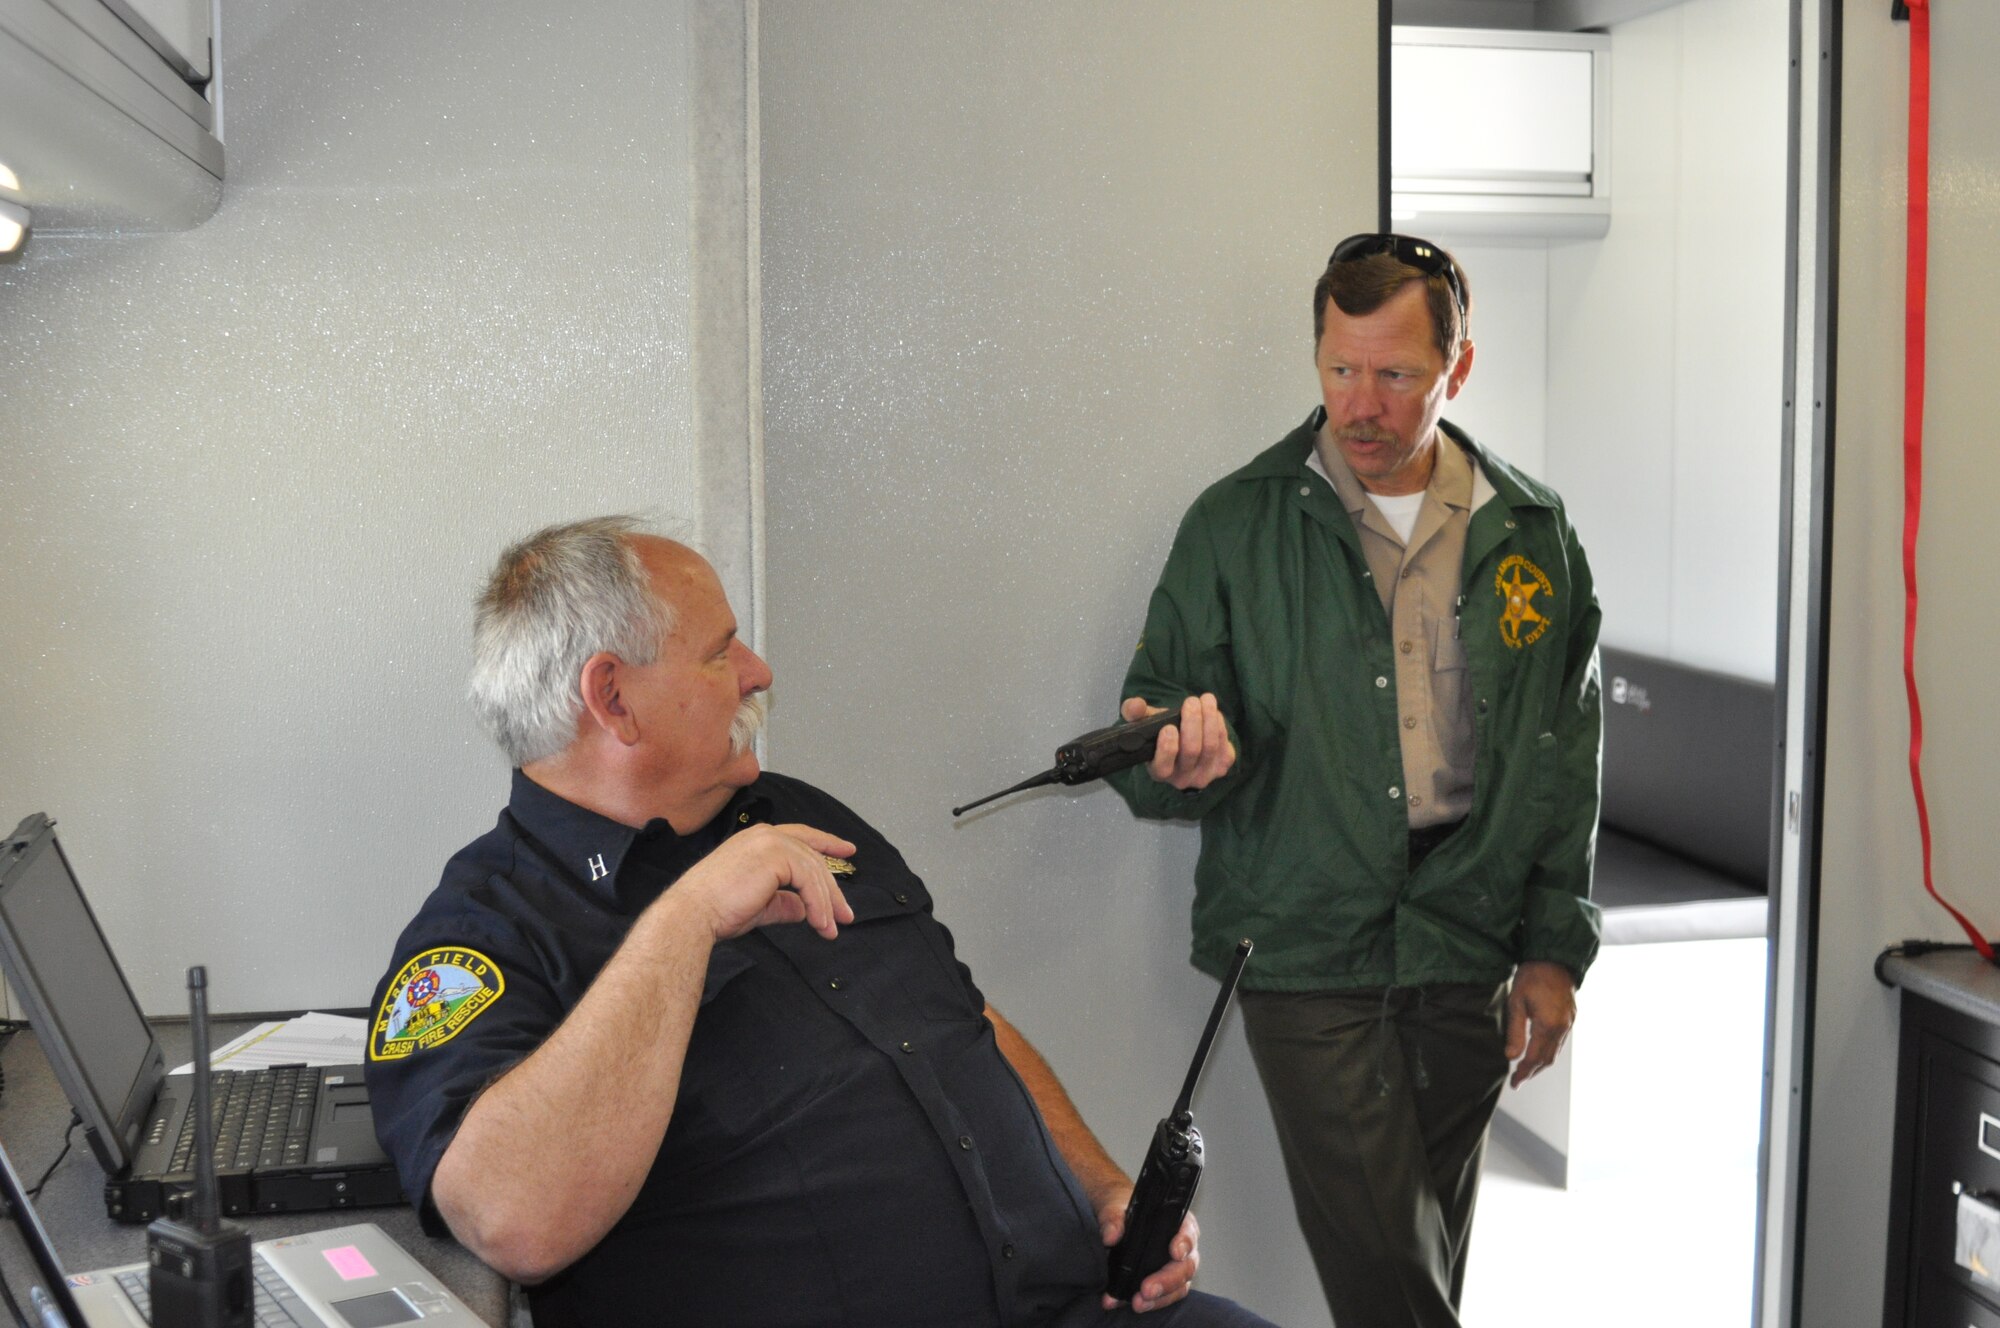 Deputy Sherriff Jay Edge (left), County of Los Angeles Sheriff's Department, talks with Capt. Scott Carpenter, March Air Reserve Base Fire Department, at the 3rd Annual Riverside County Multi-Agency Communication Interoperability Test at the Ben Clark Training Center in Riverside, Calif., May 19, 2011.  The test, nicknamed "Radio Rodeo," ensures city, county, state and federal first responder agencies will be able to work together during a major disaster.  (U.S. Air Force photo/ Megan Just)